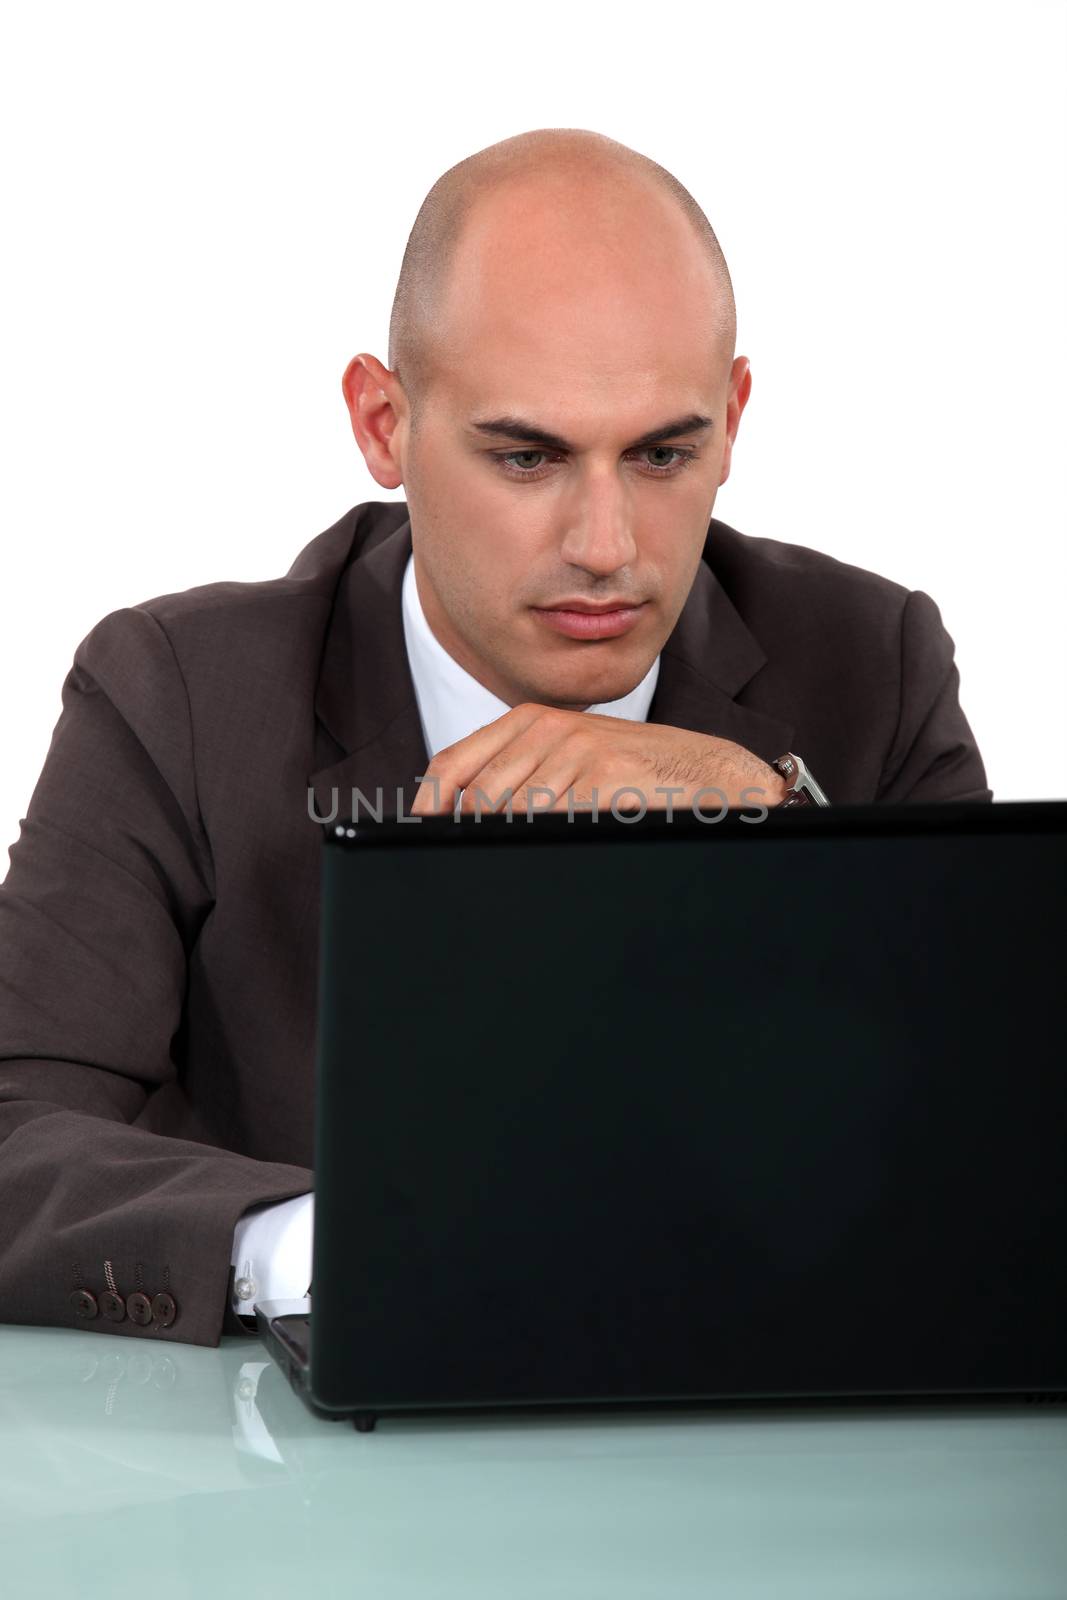 Bald office worker sat at computer by phovoir